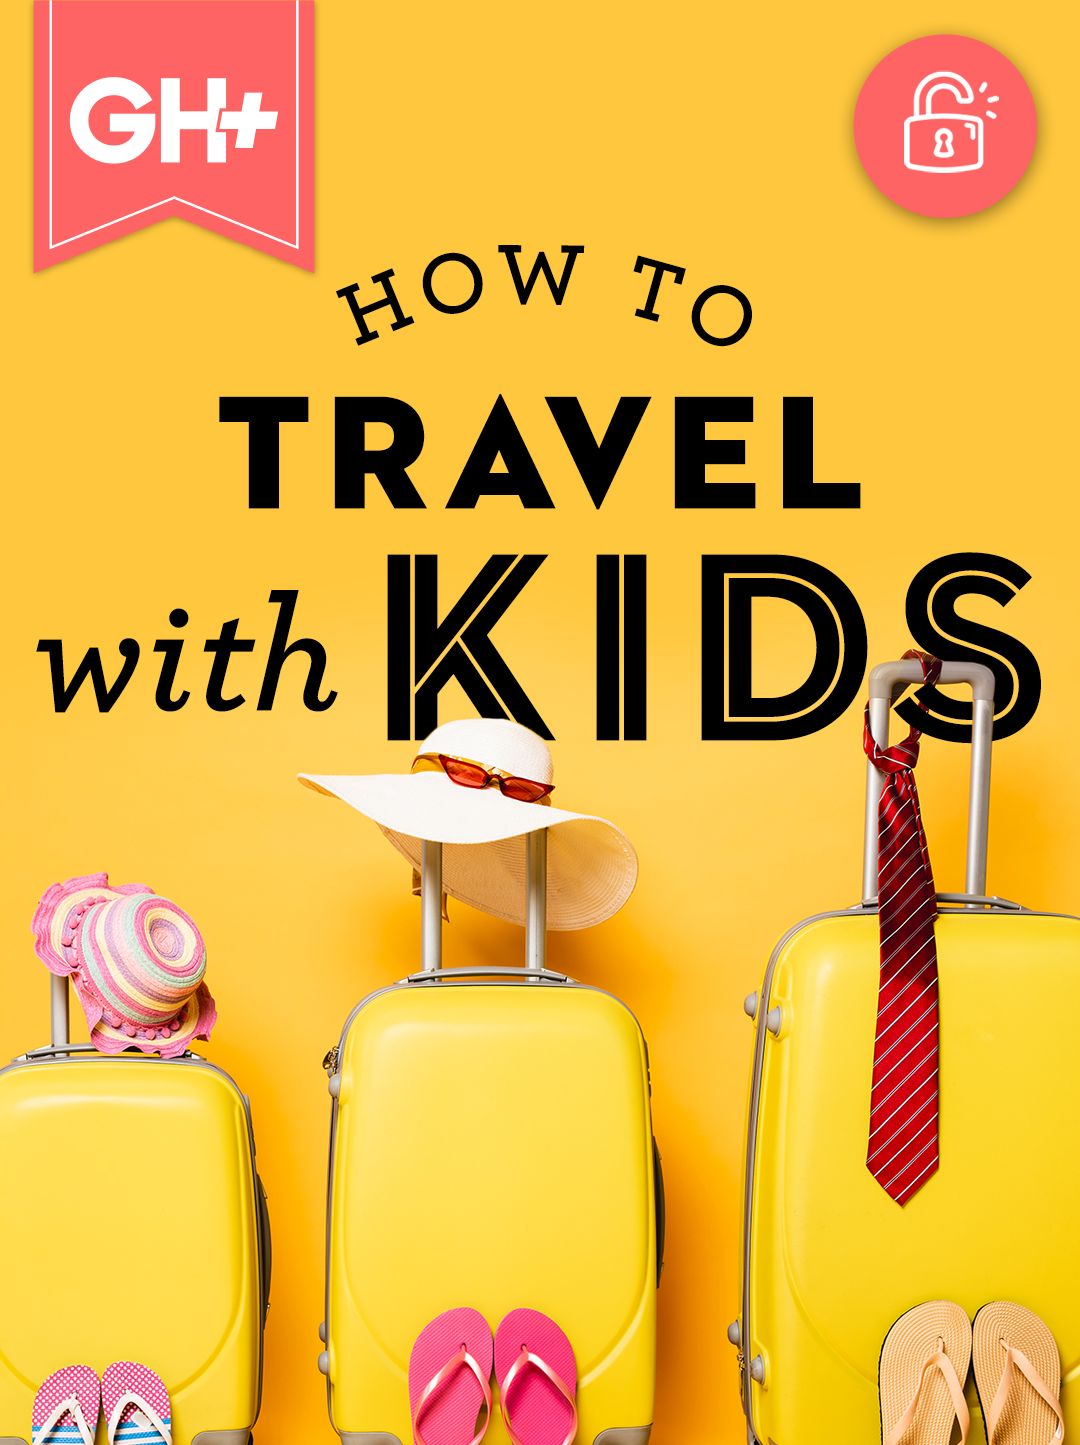 how to travel with kids  gh plus exclusive guide